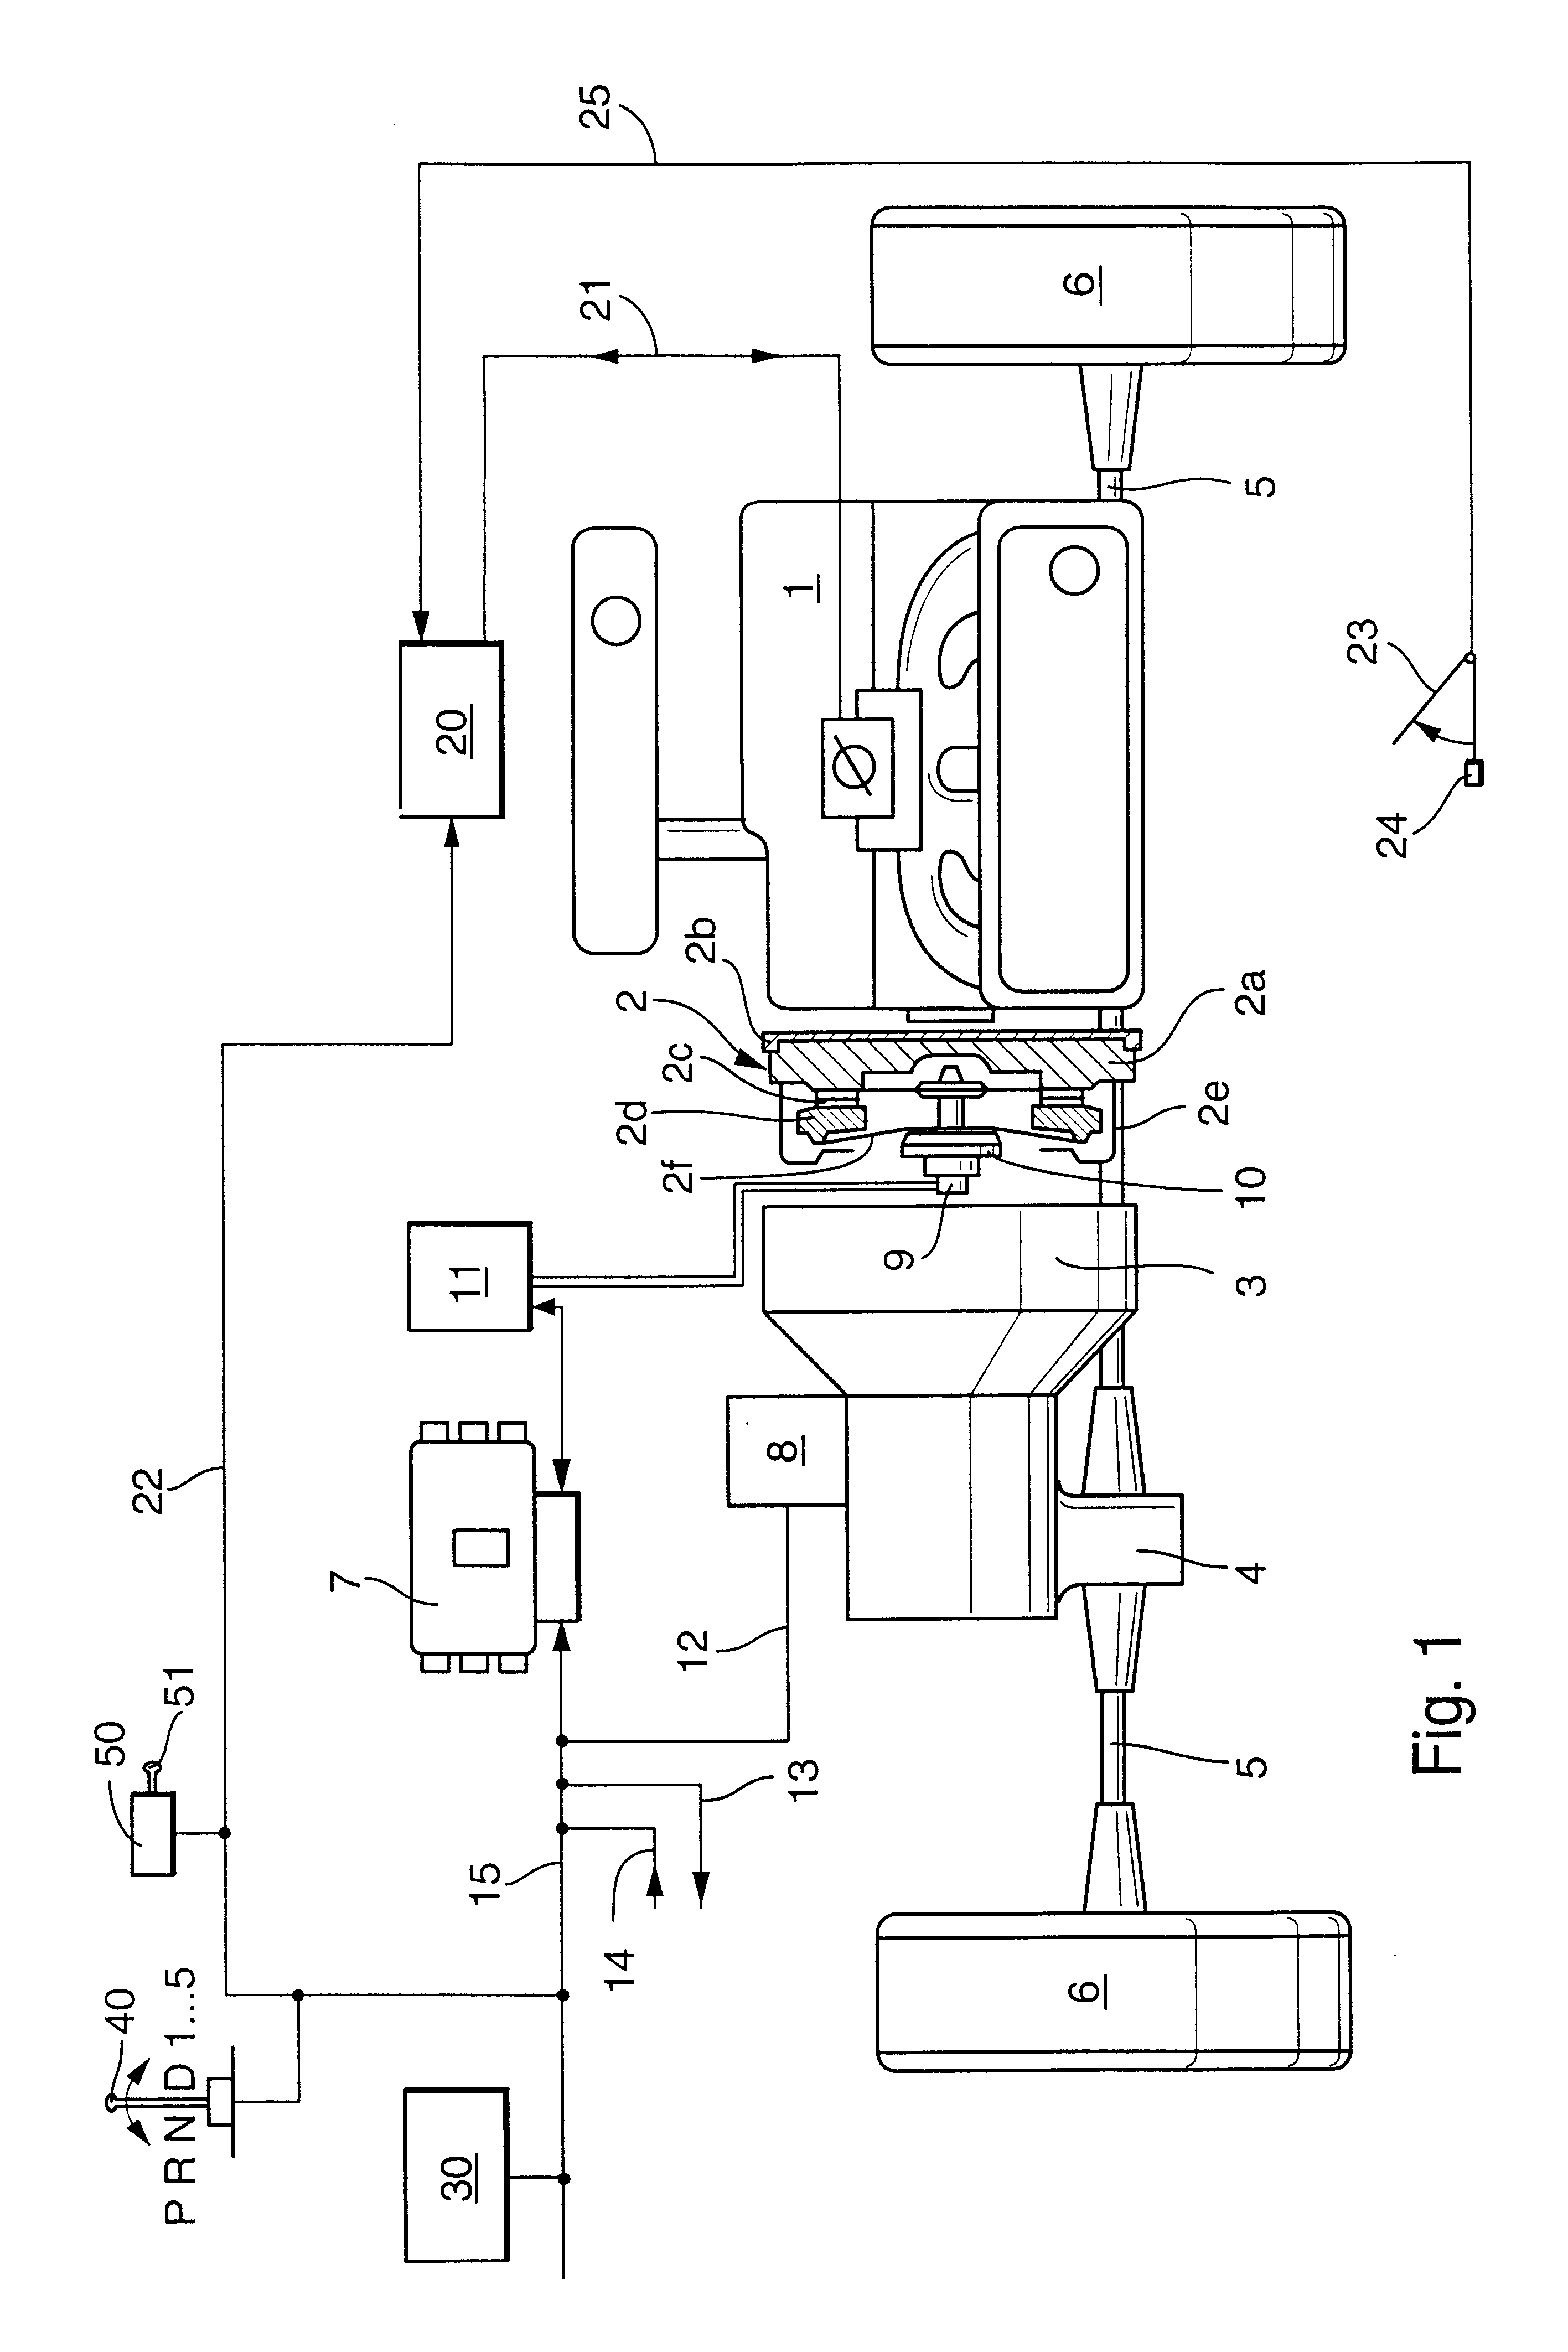 Actuating apparatus for automated constituents of power trains in motor vehicles